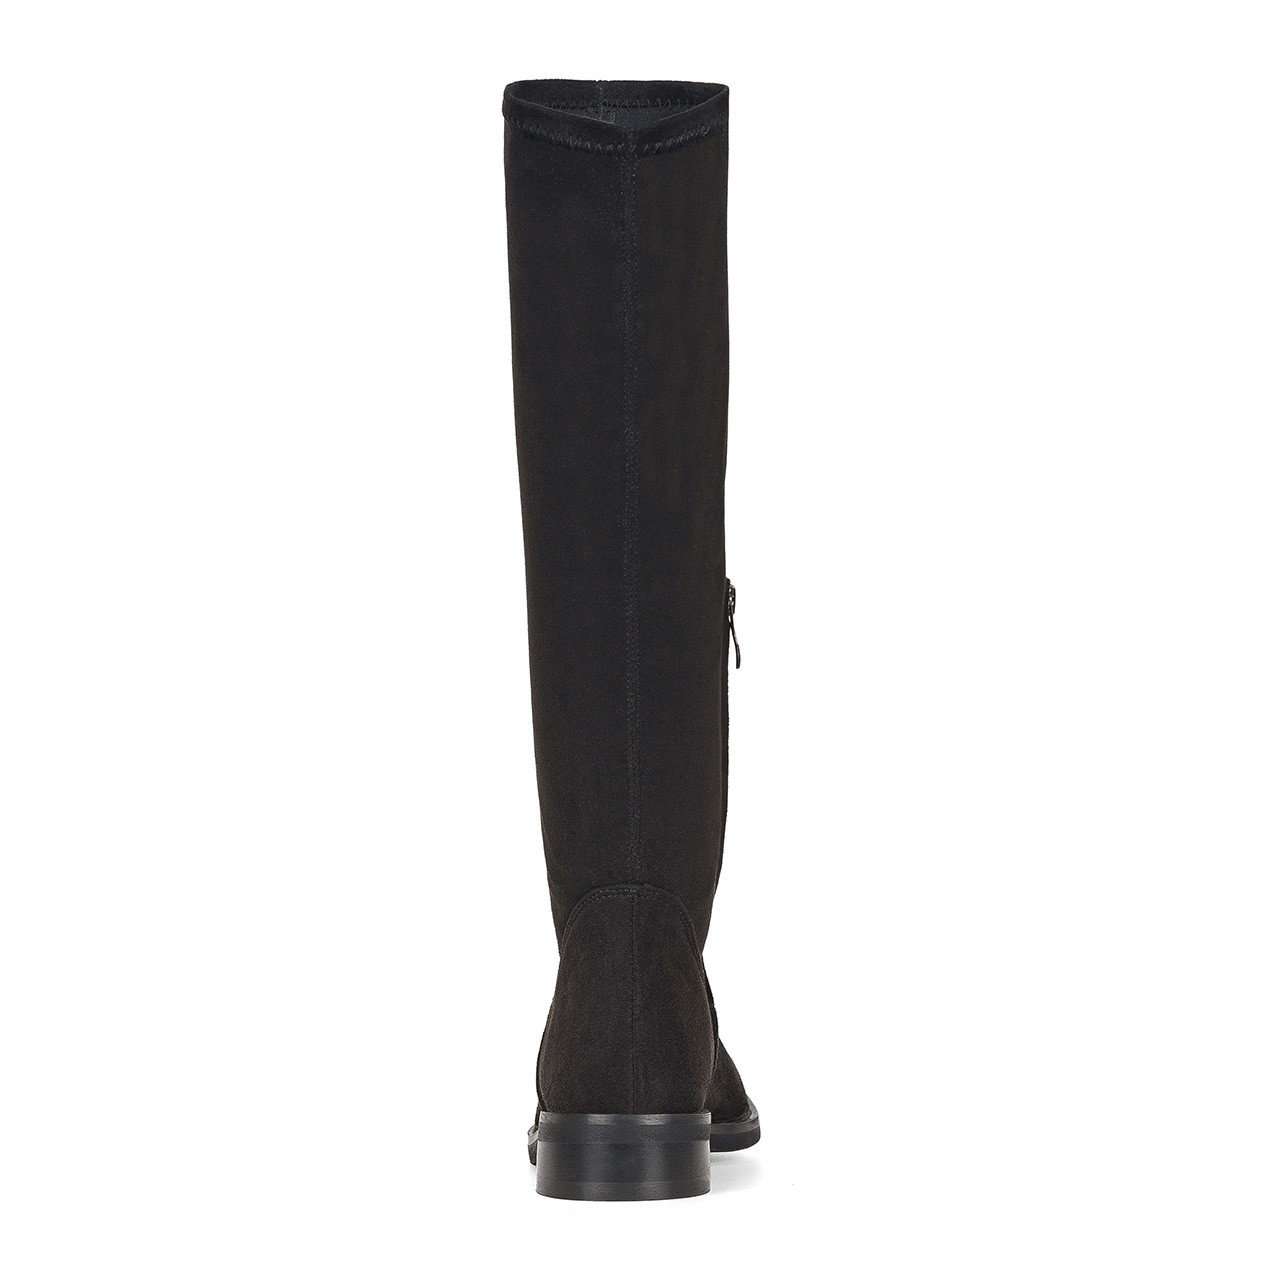 Knee high boots handmade of natural premium leather